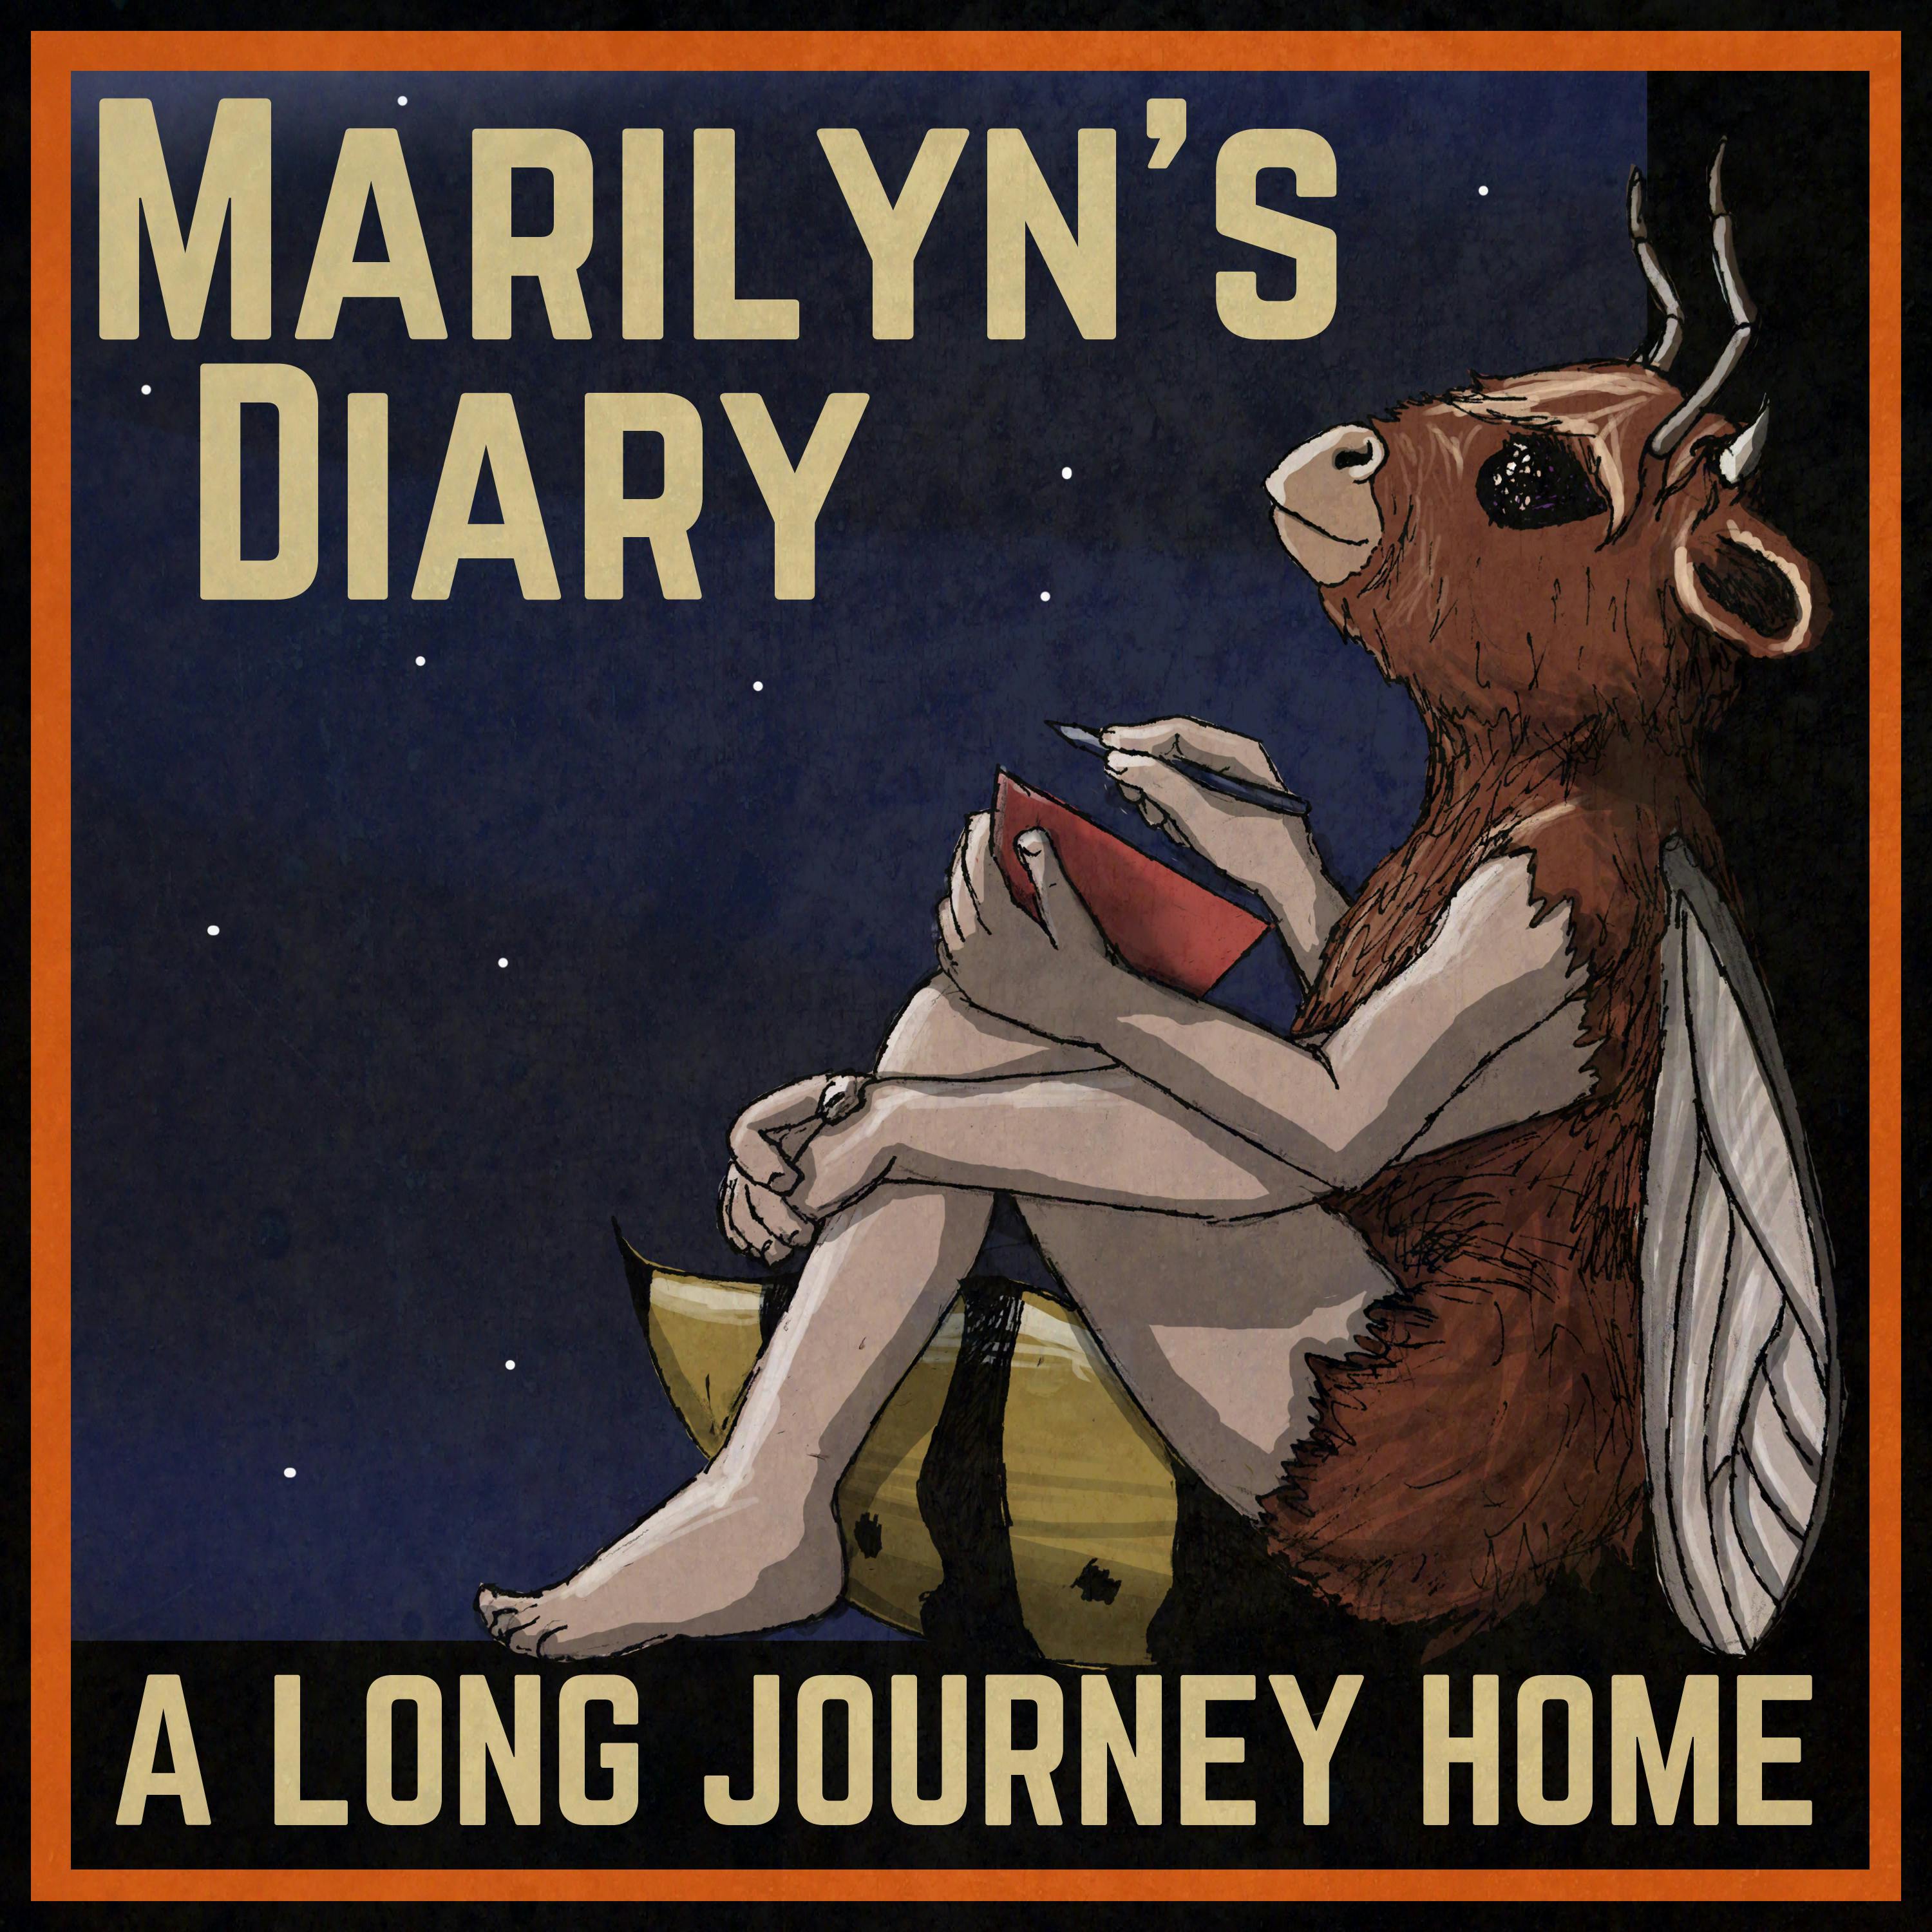 Marilyn's Diary: A Long Journey Home - E02